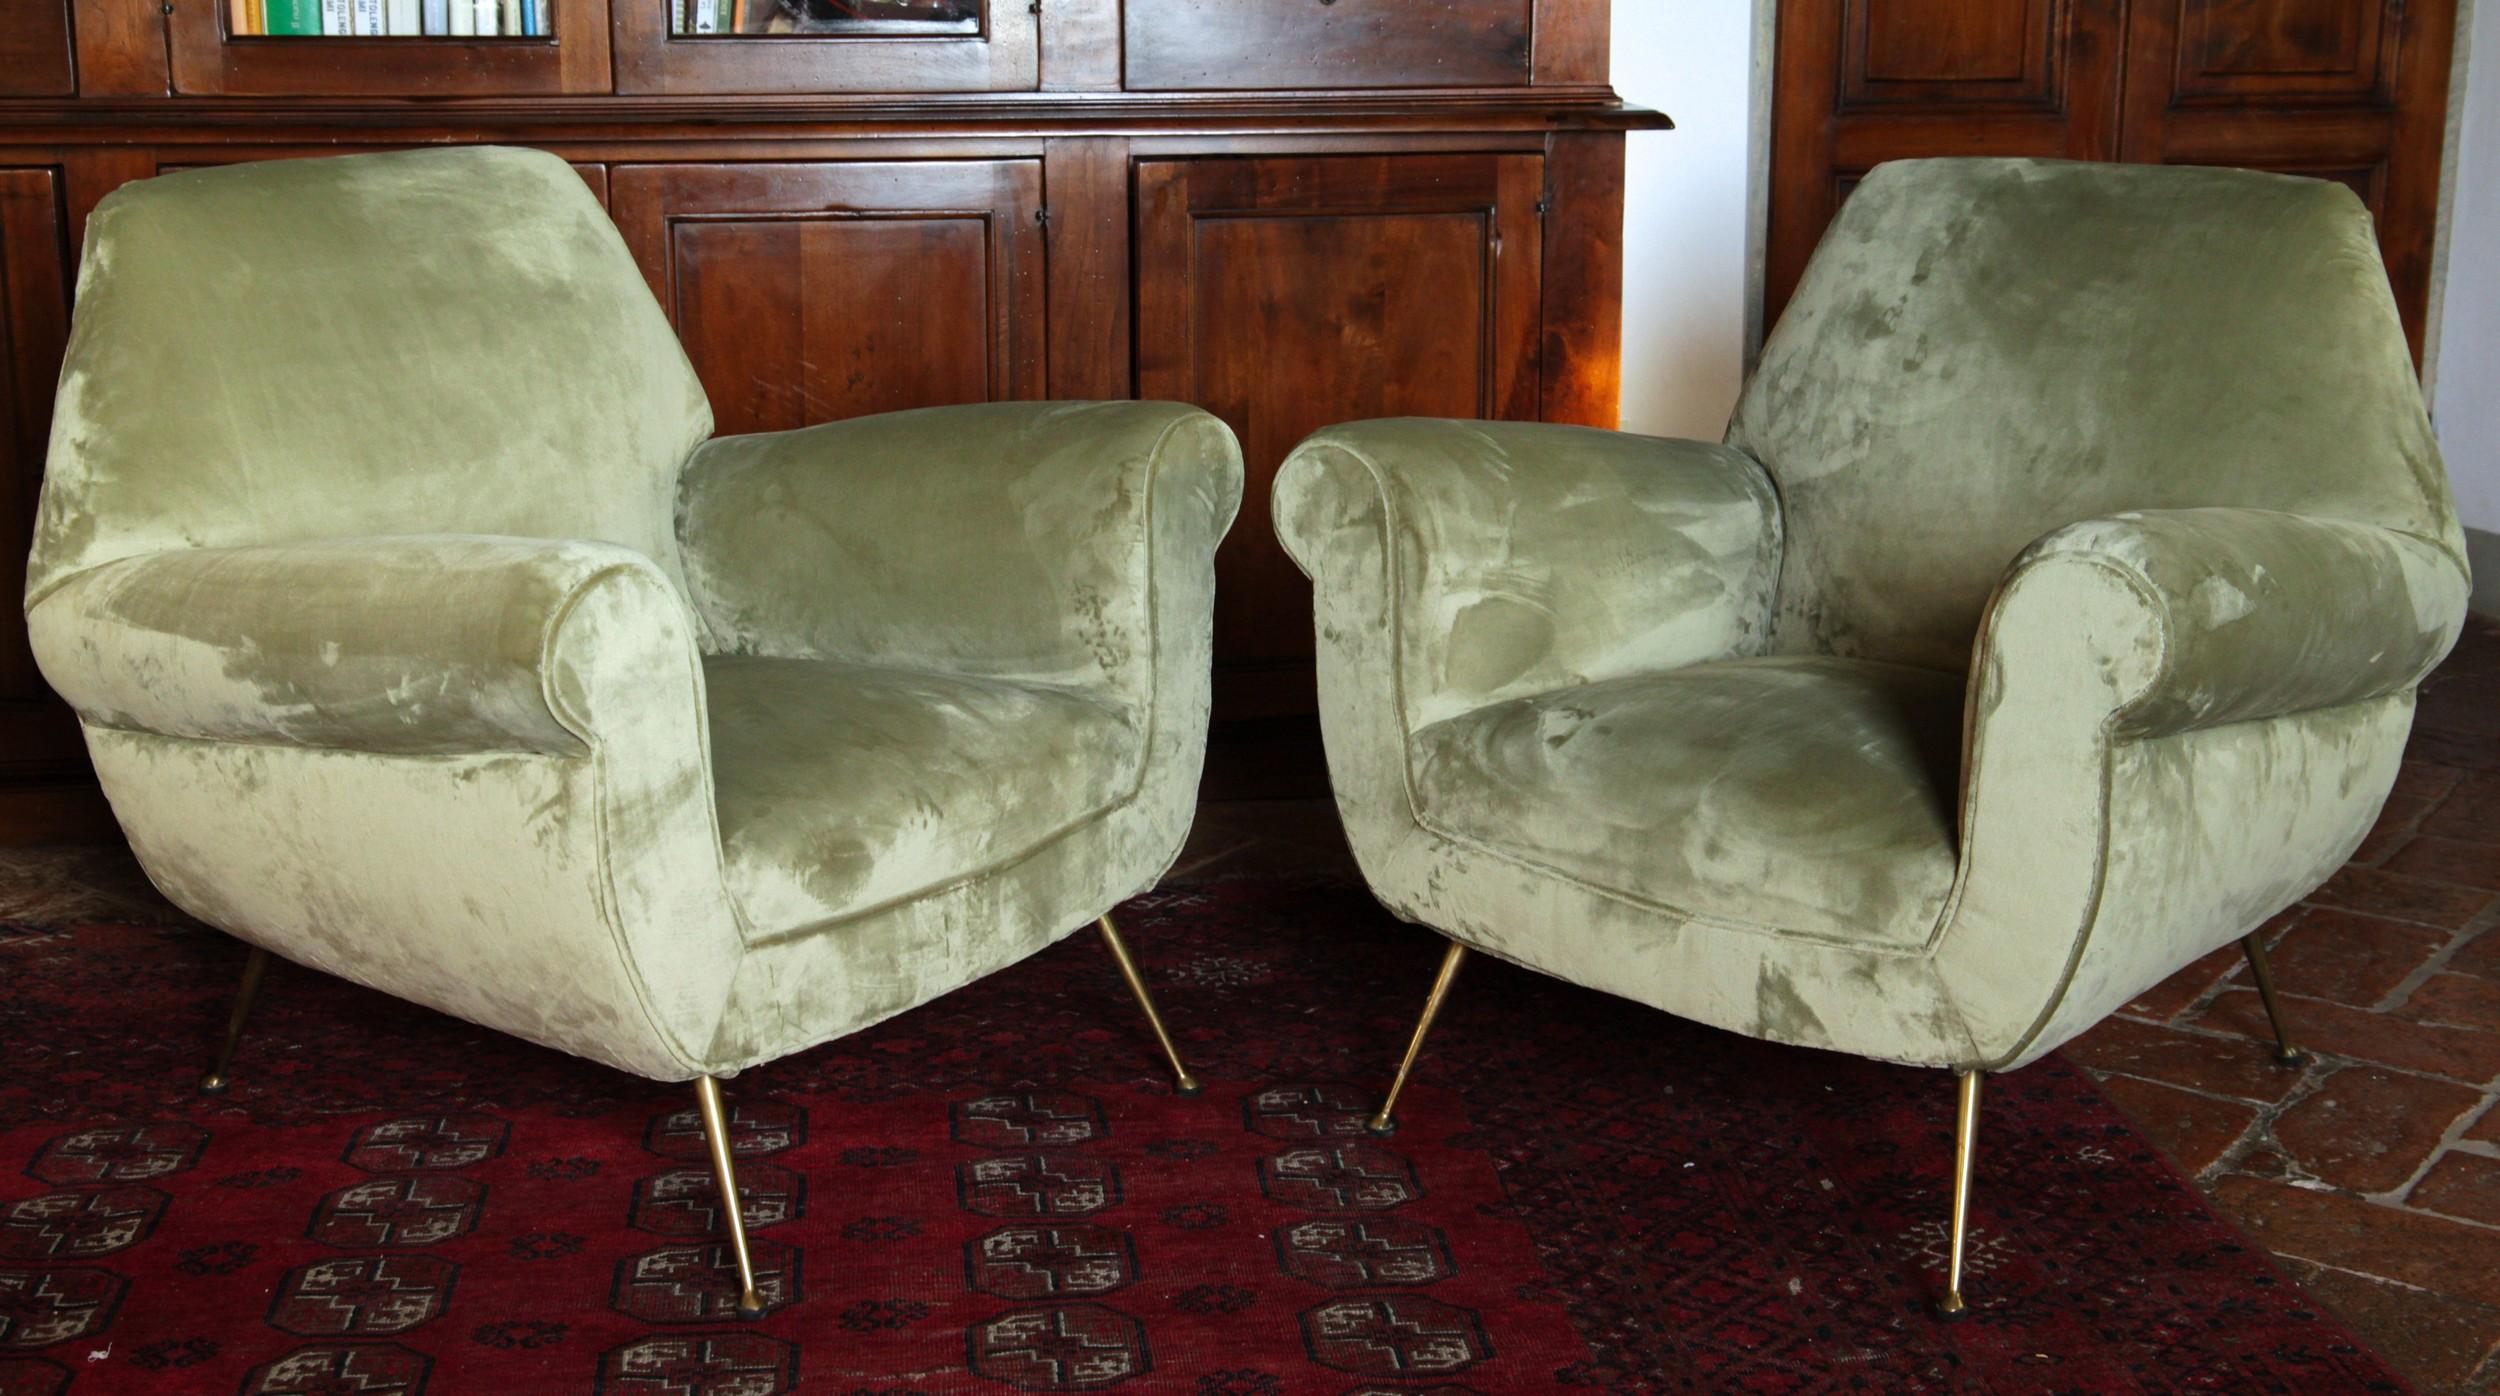 Two armchairs designed by Gigi Radice. Made by Minotti in the 1950s.

From a apartment in central Rome, wood structure was made firm, padding replaced, belts replaced and upholstered with an Italian woven green high pile sage green writing